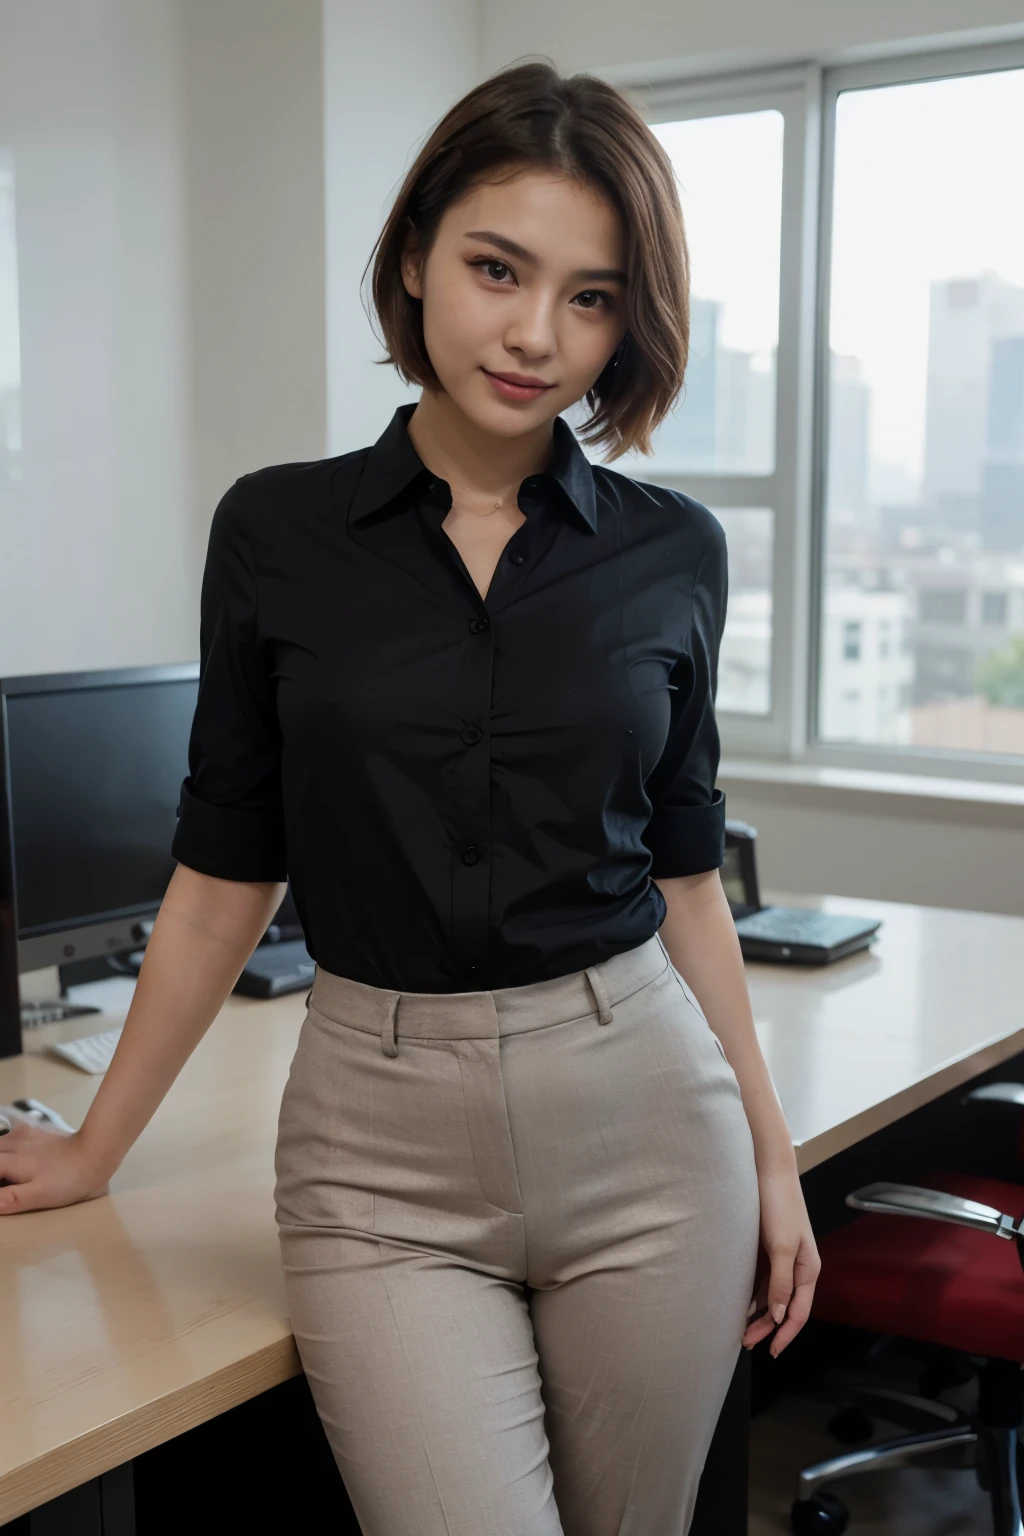 top-quality、​masterpiece、超A high resolution、(realisitic:1.4)、Beautuful Women１、Beautiful detail eyes and skin、smile、Light brown short-cut hair, business suit and shirt, gorgeous chinese model, photo of slim girl model, IG-Modell, beautiful female model, black auit, luxury office, long pants